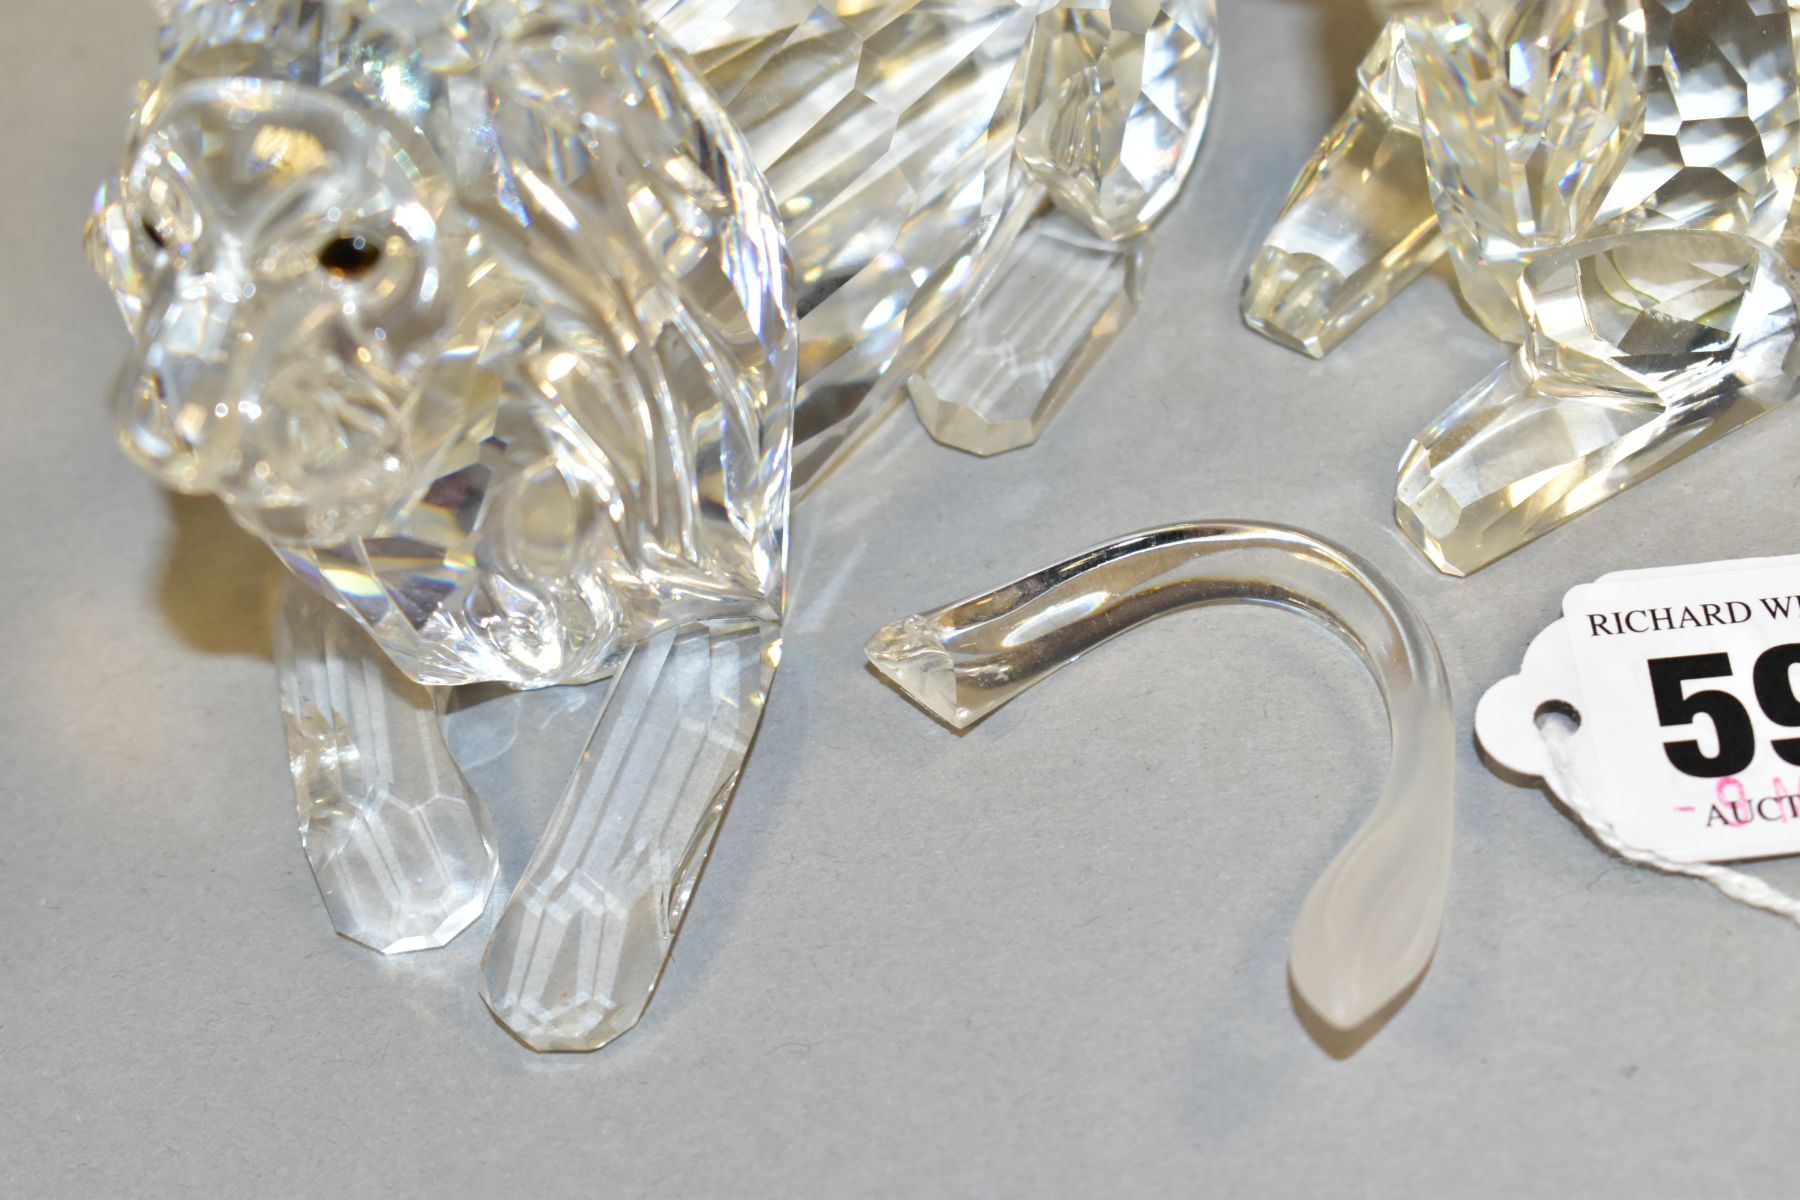 A SWAROVSKI CRYSTAL LION AND KUDU, Swarovski Crystal Club members pieces from the Inspiration Africa - Image 2 of 4